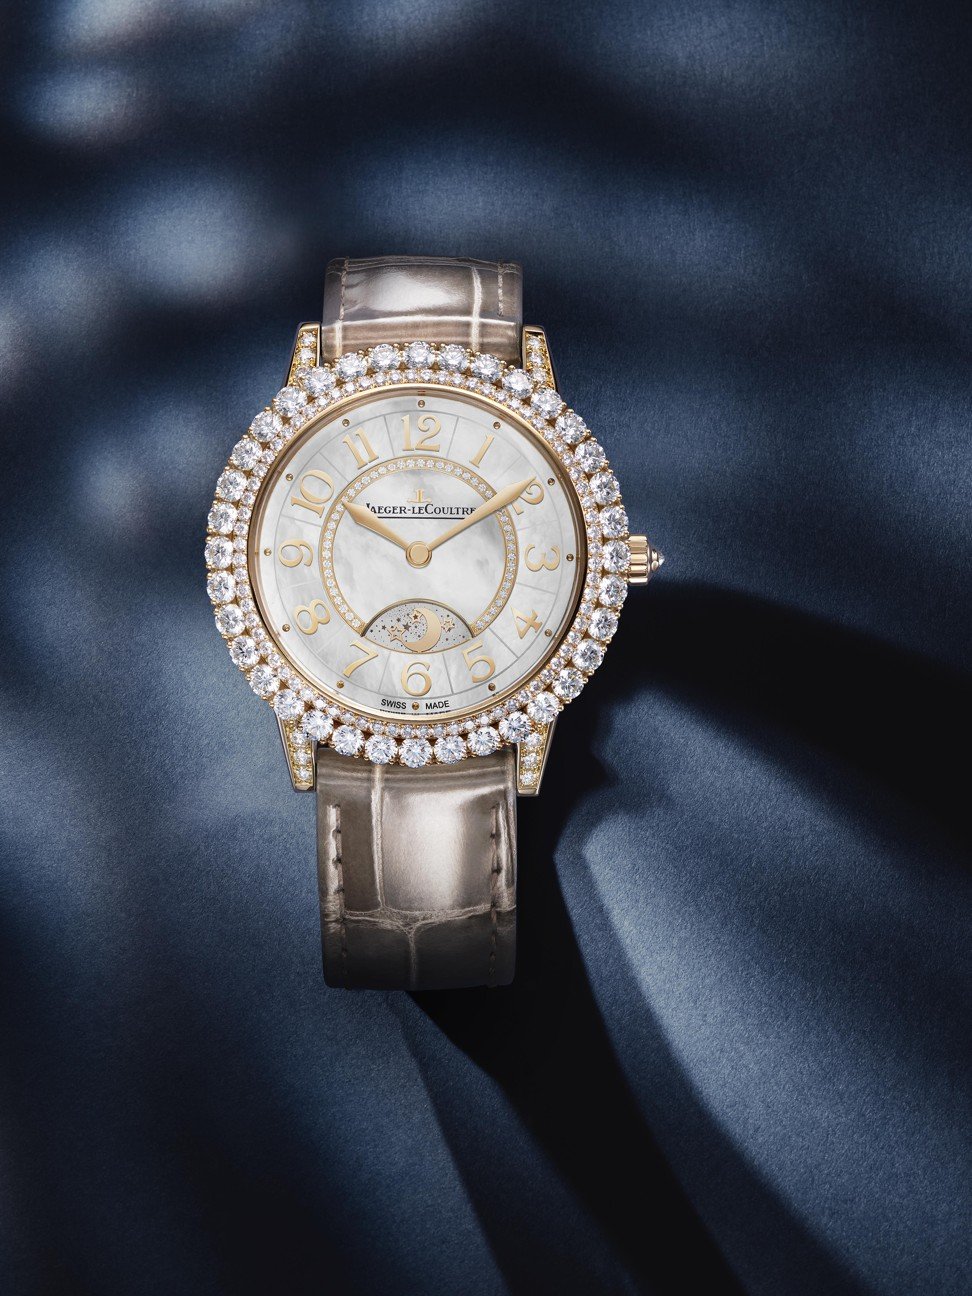 Jaeger-LeCoultre’s Rendez-Vous Day & Night Jewellery watch